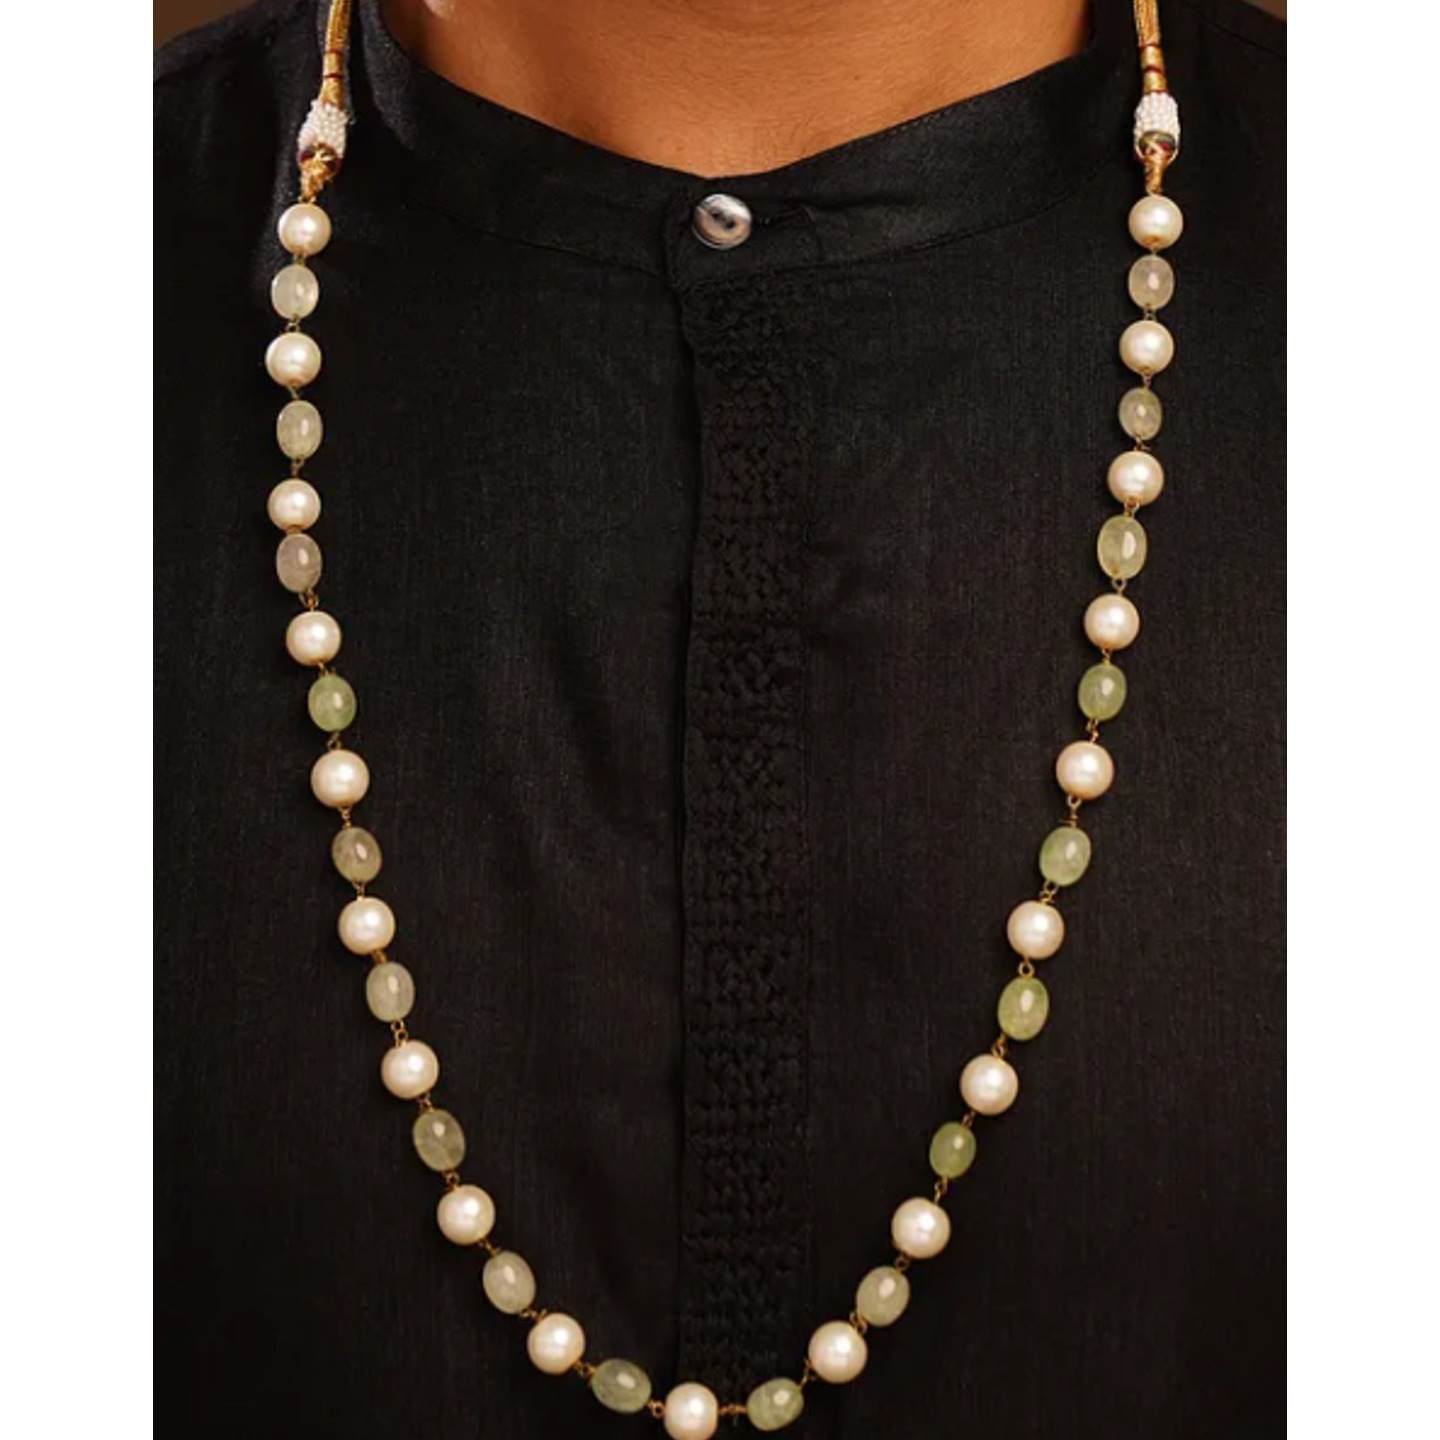 White Green Beaded Necklace With For Men